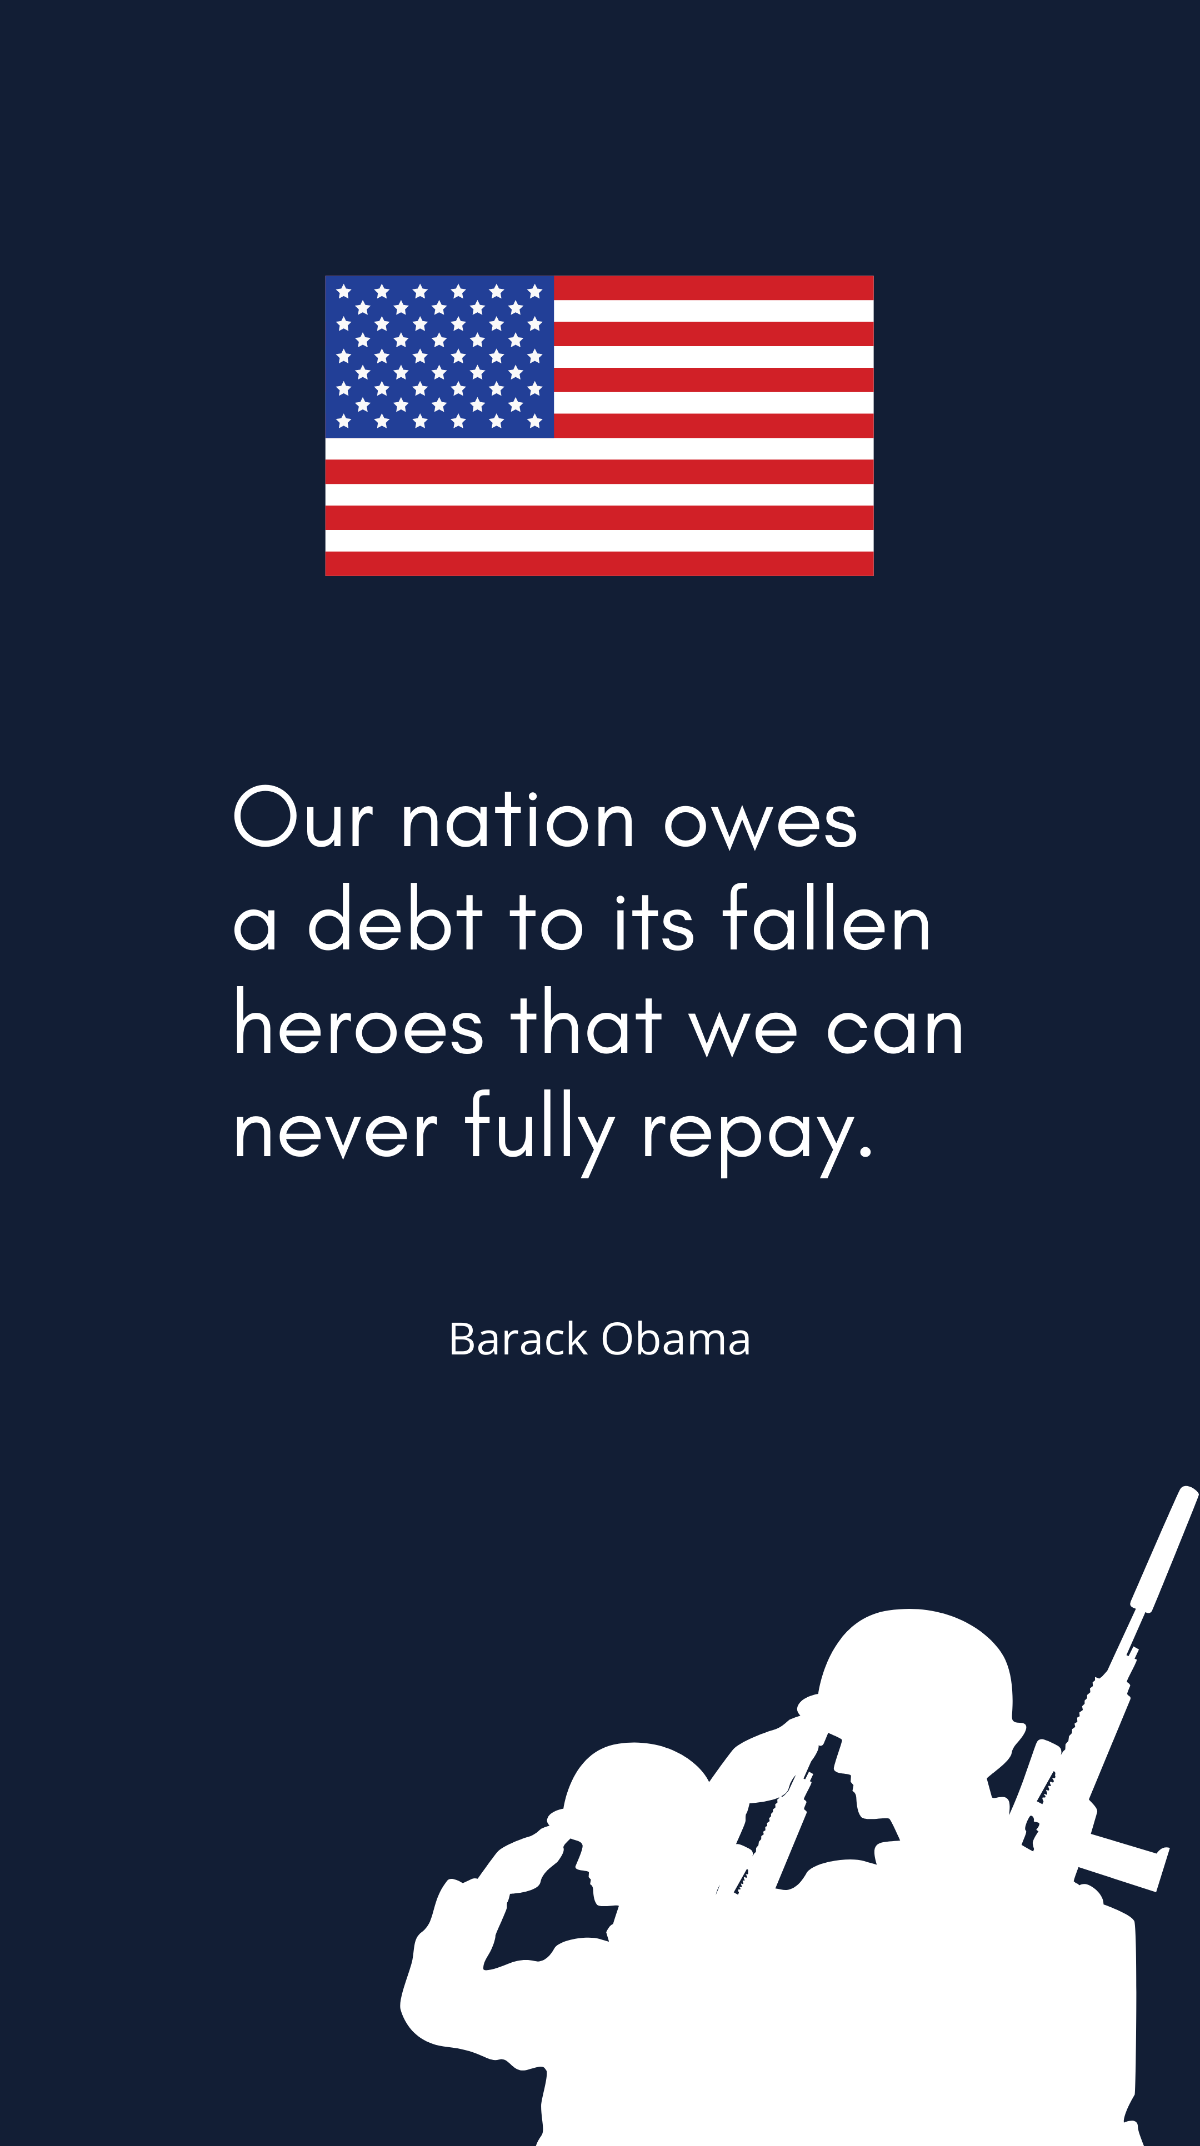 Barack Obama - Our nation owes a debt to its fallen heroes that we can never fully repay. Template